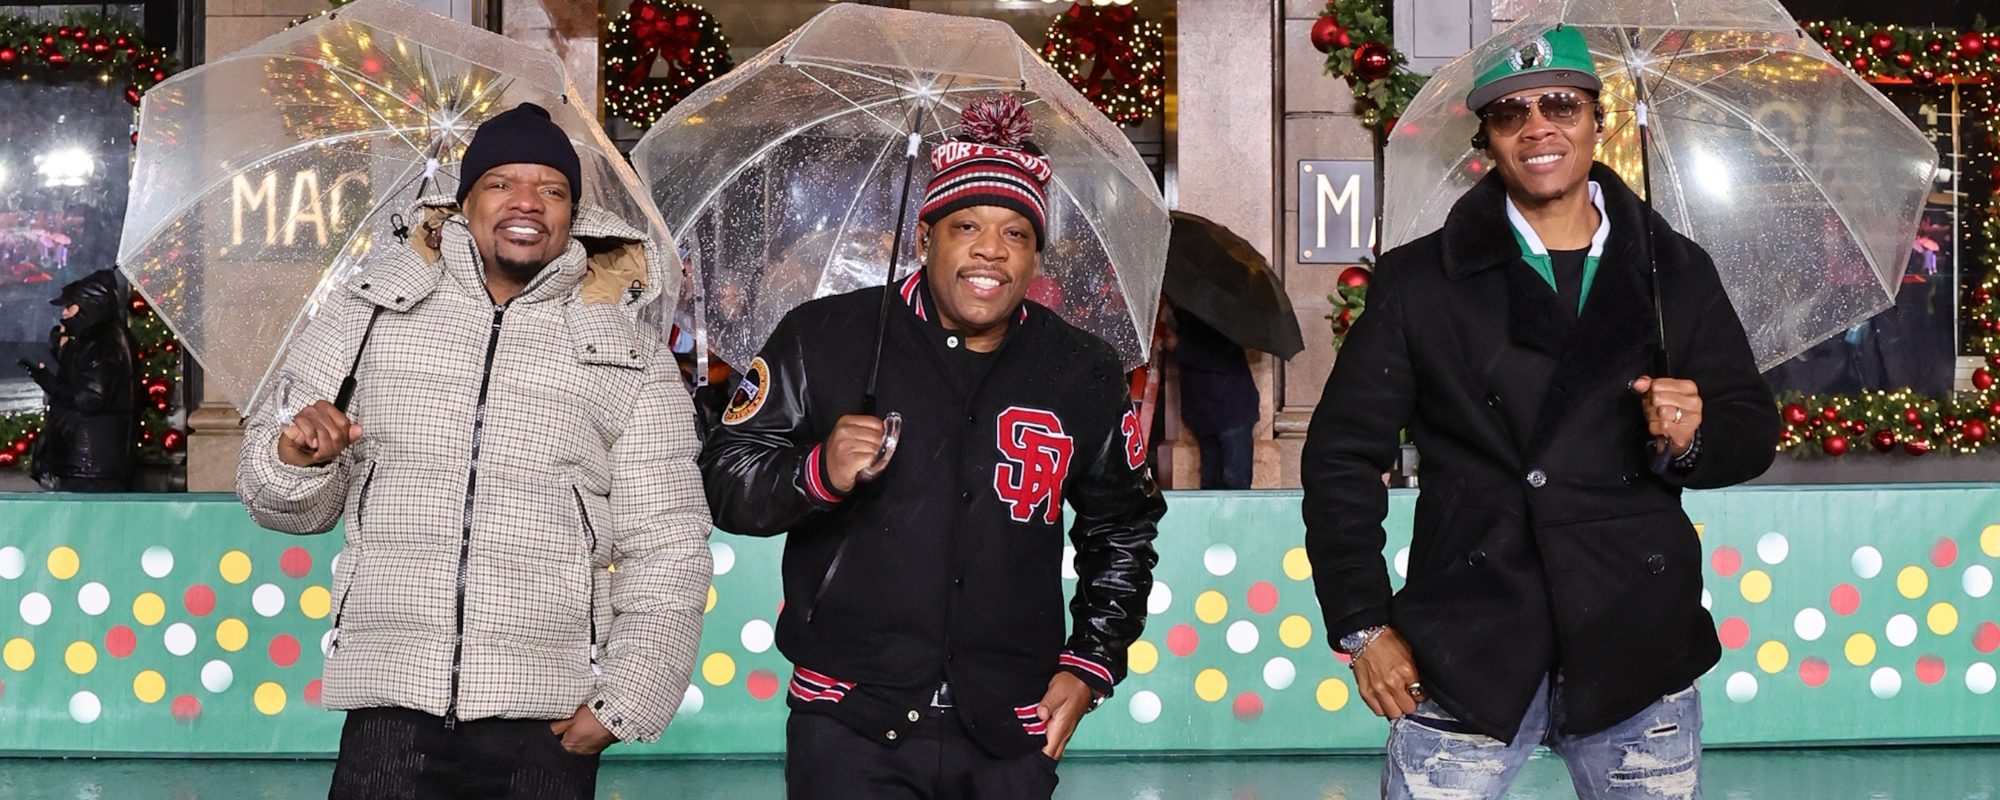 Watch: Bell Biv DeVoe Perform “Poison” in Front of the Teenage Mutant Ninja Turtles Float During the Macy’s Thanksgiving Day Parade